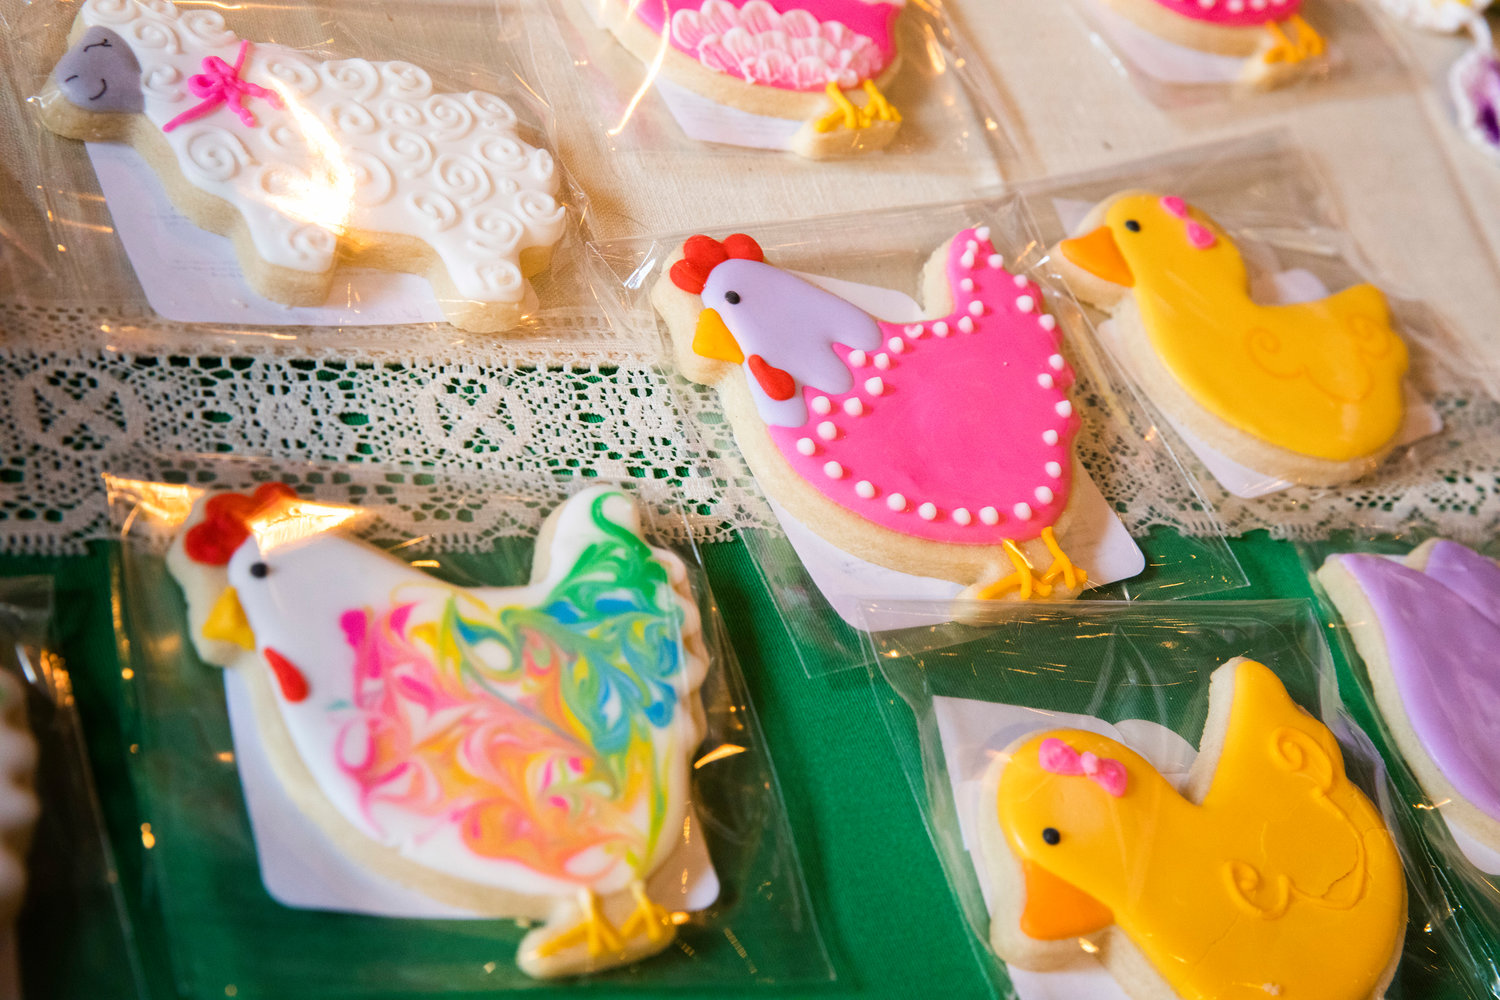 Lil’ Country Cookies are decorated and on display during the Tenino Arts Spring Market featuring 32 regional artisans inside the Kodiak Room on Sunday.